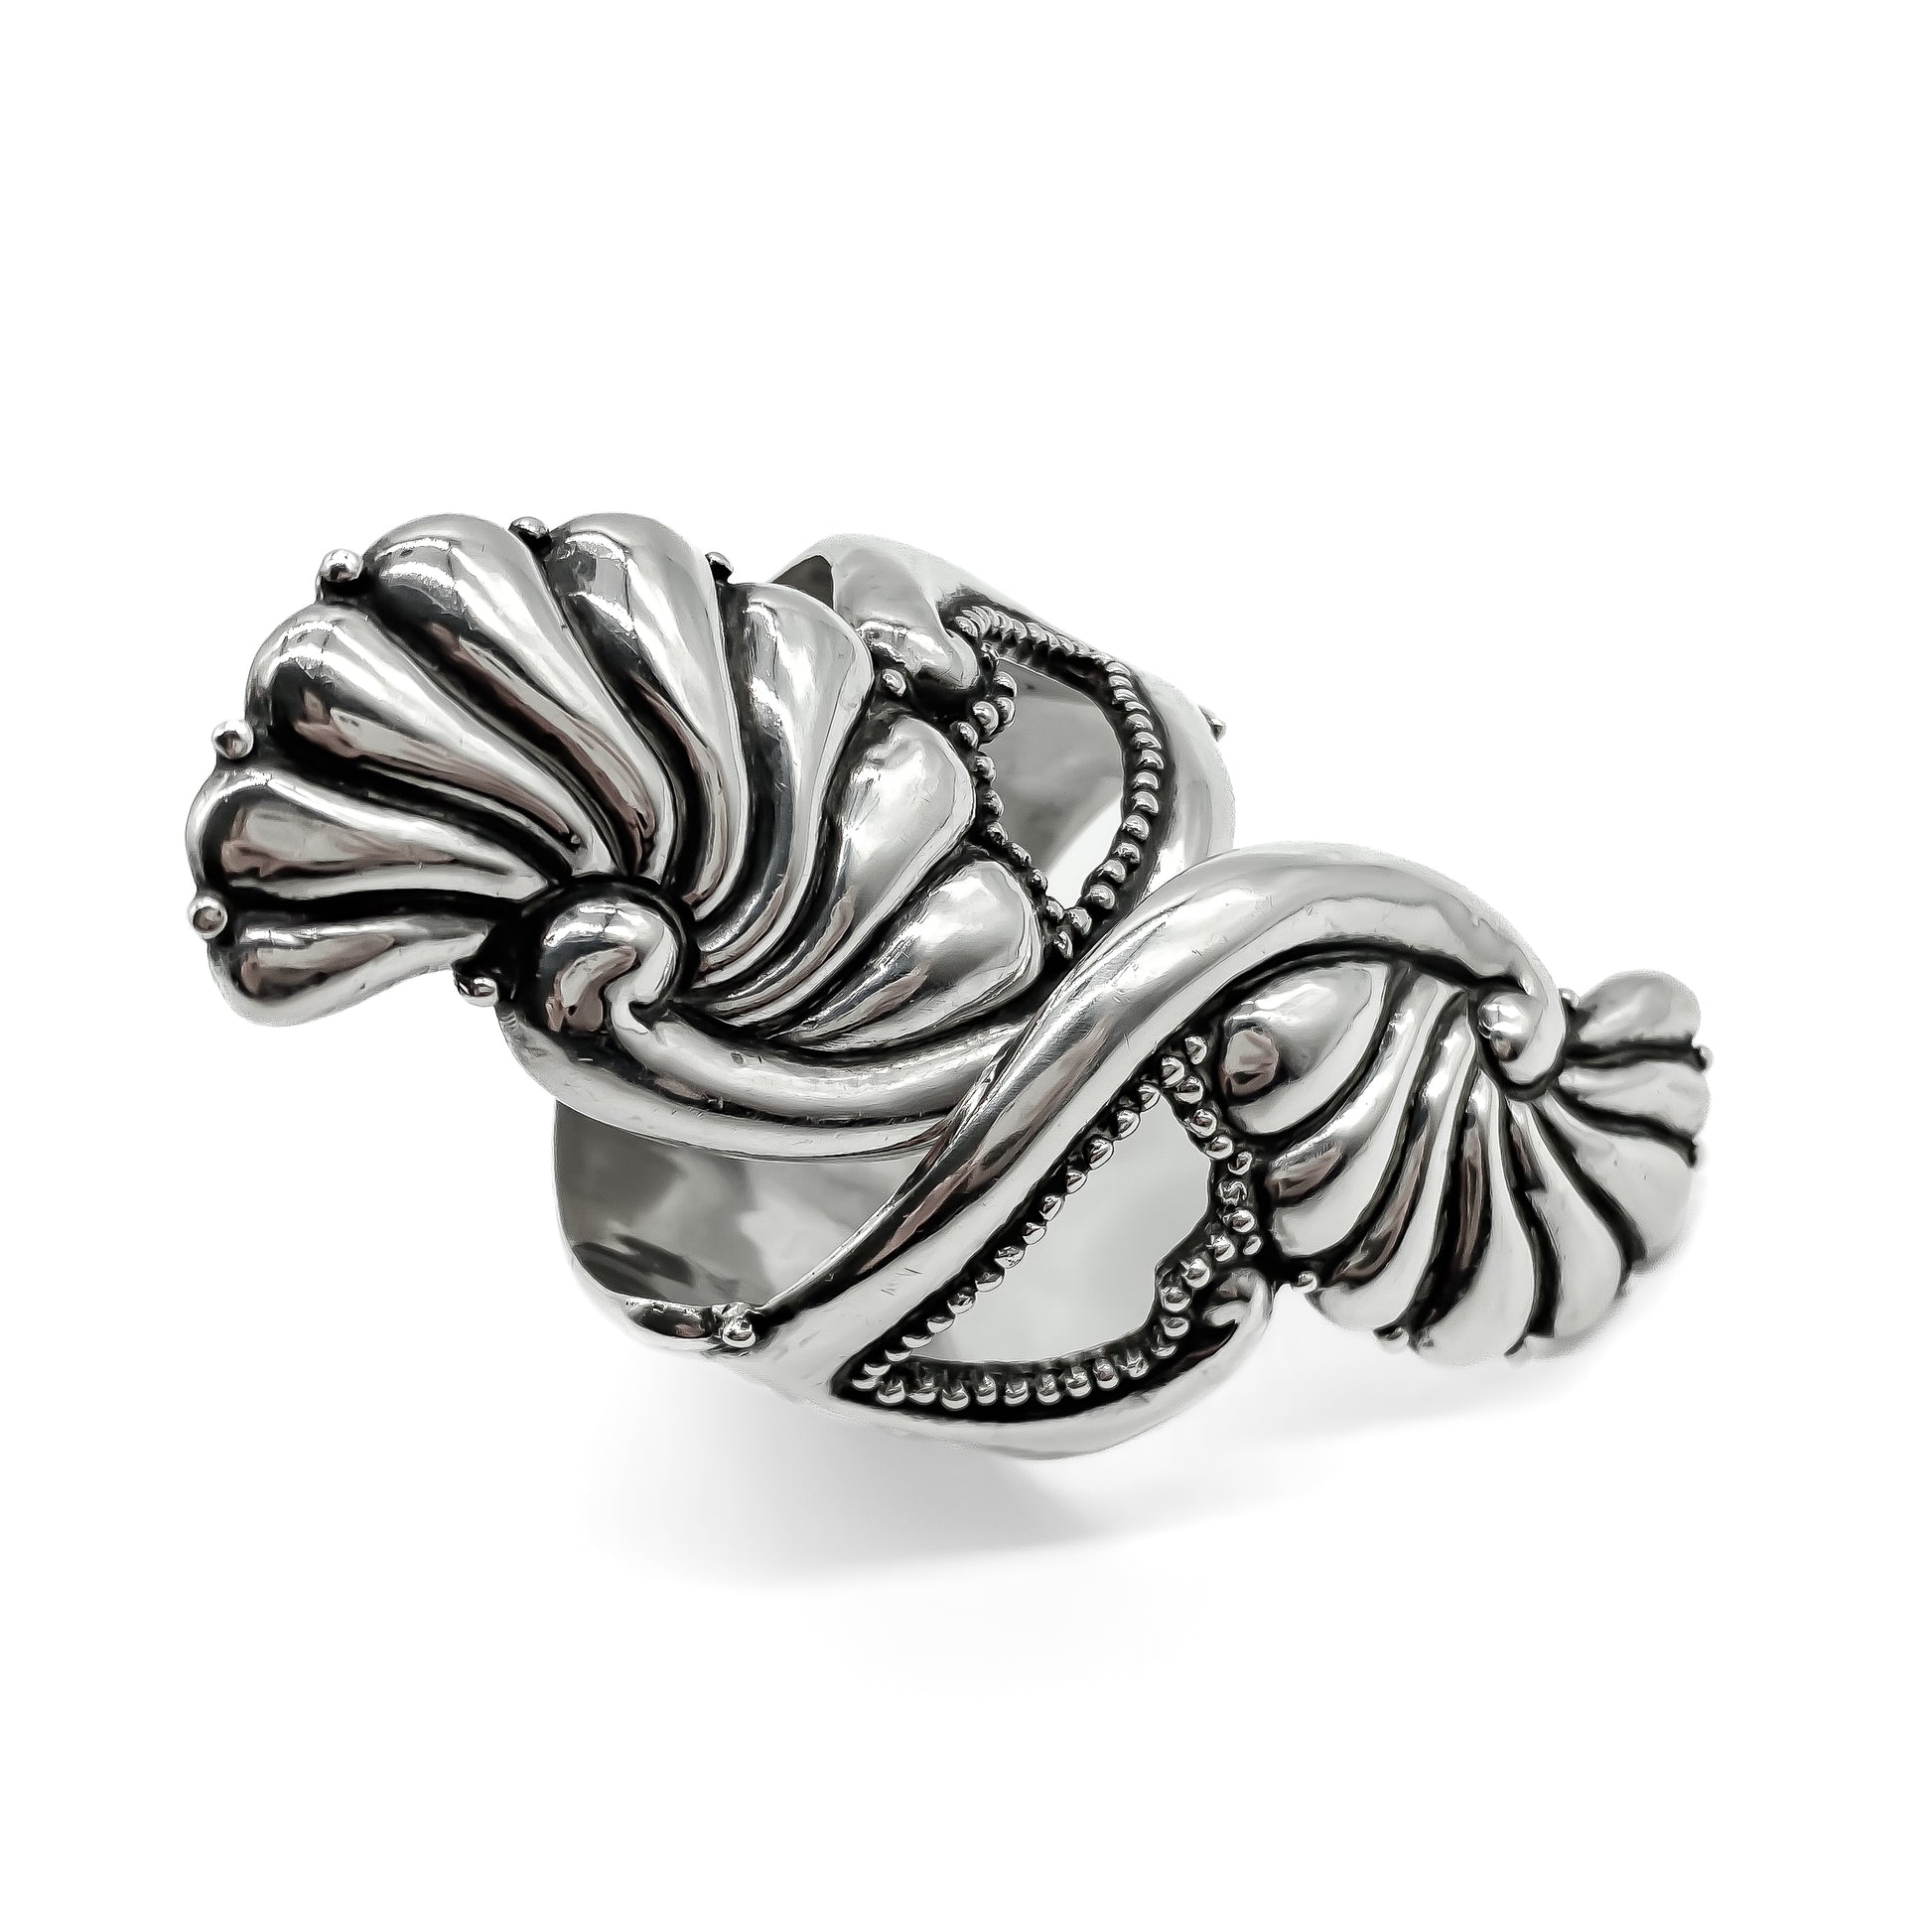 Stunning Mexican sterling silver repoussé clamper bangle. Made in Taxco. 980 Silver Stamp